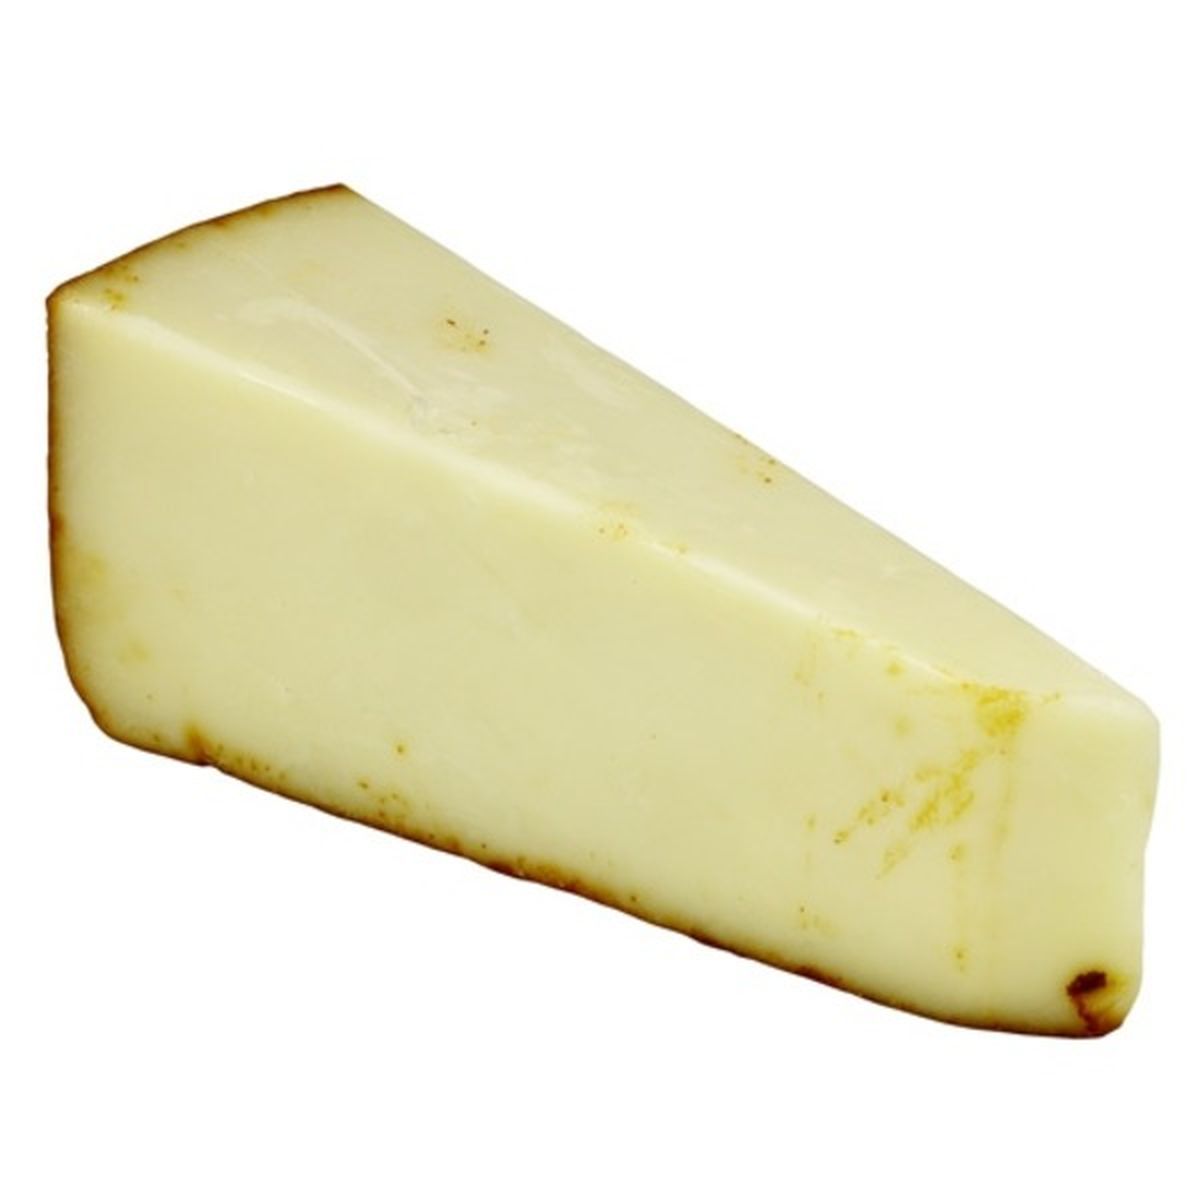 Calories in Carr Valley Cheese Applewood Smoked Cheddar Cheese